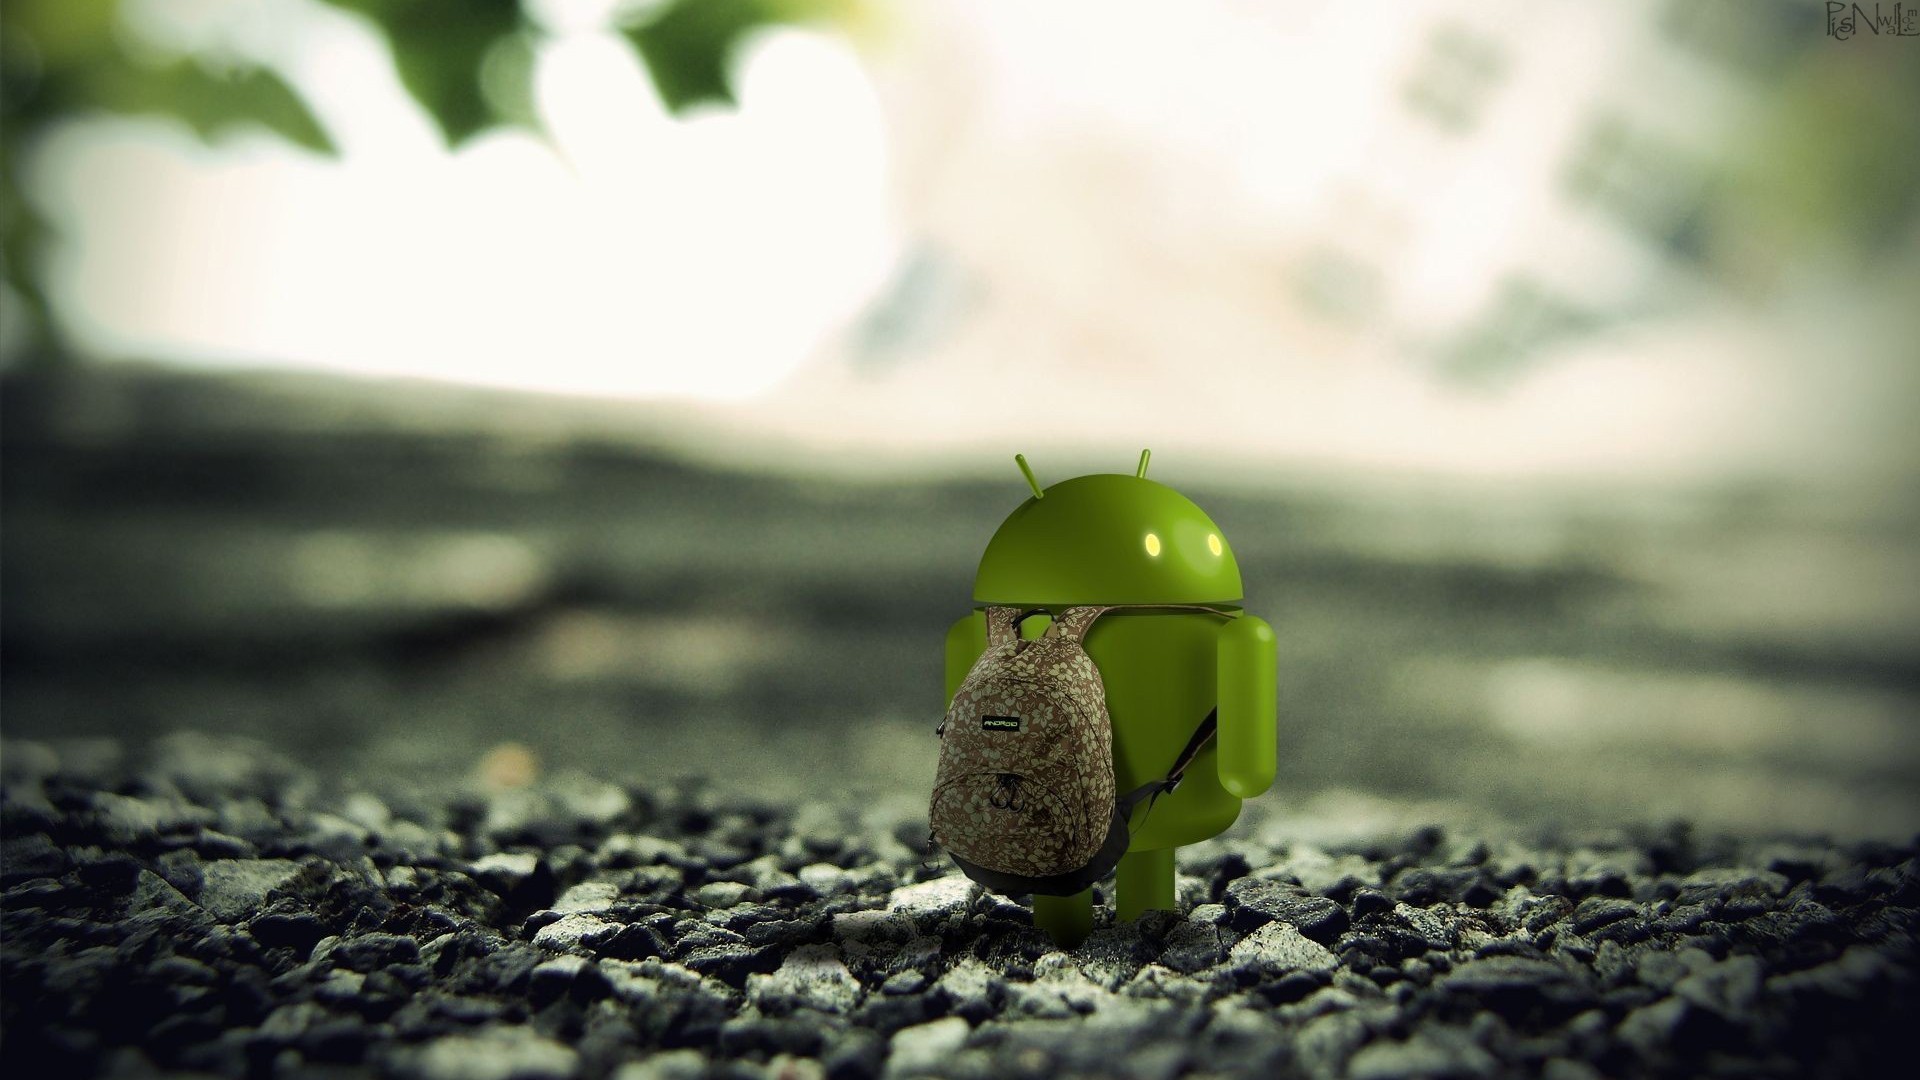 cool android wallpapers hd #21